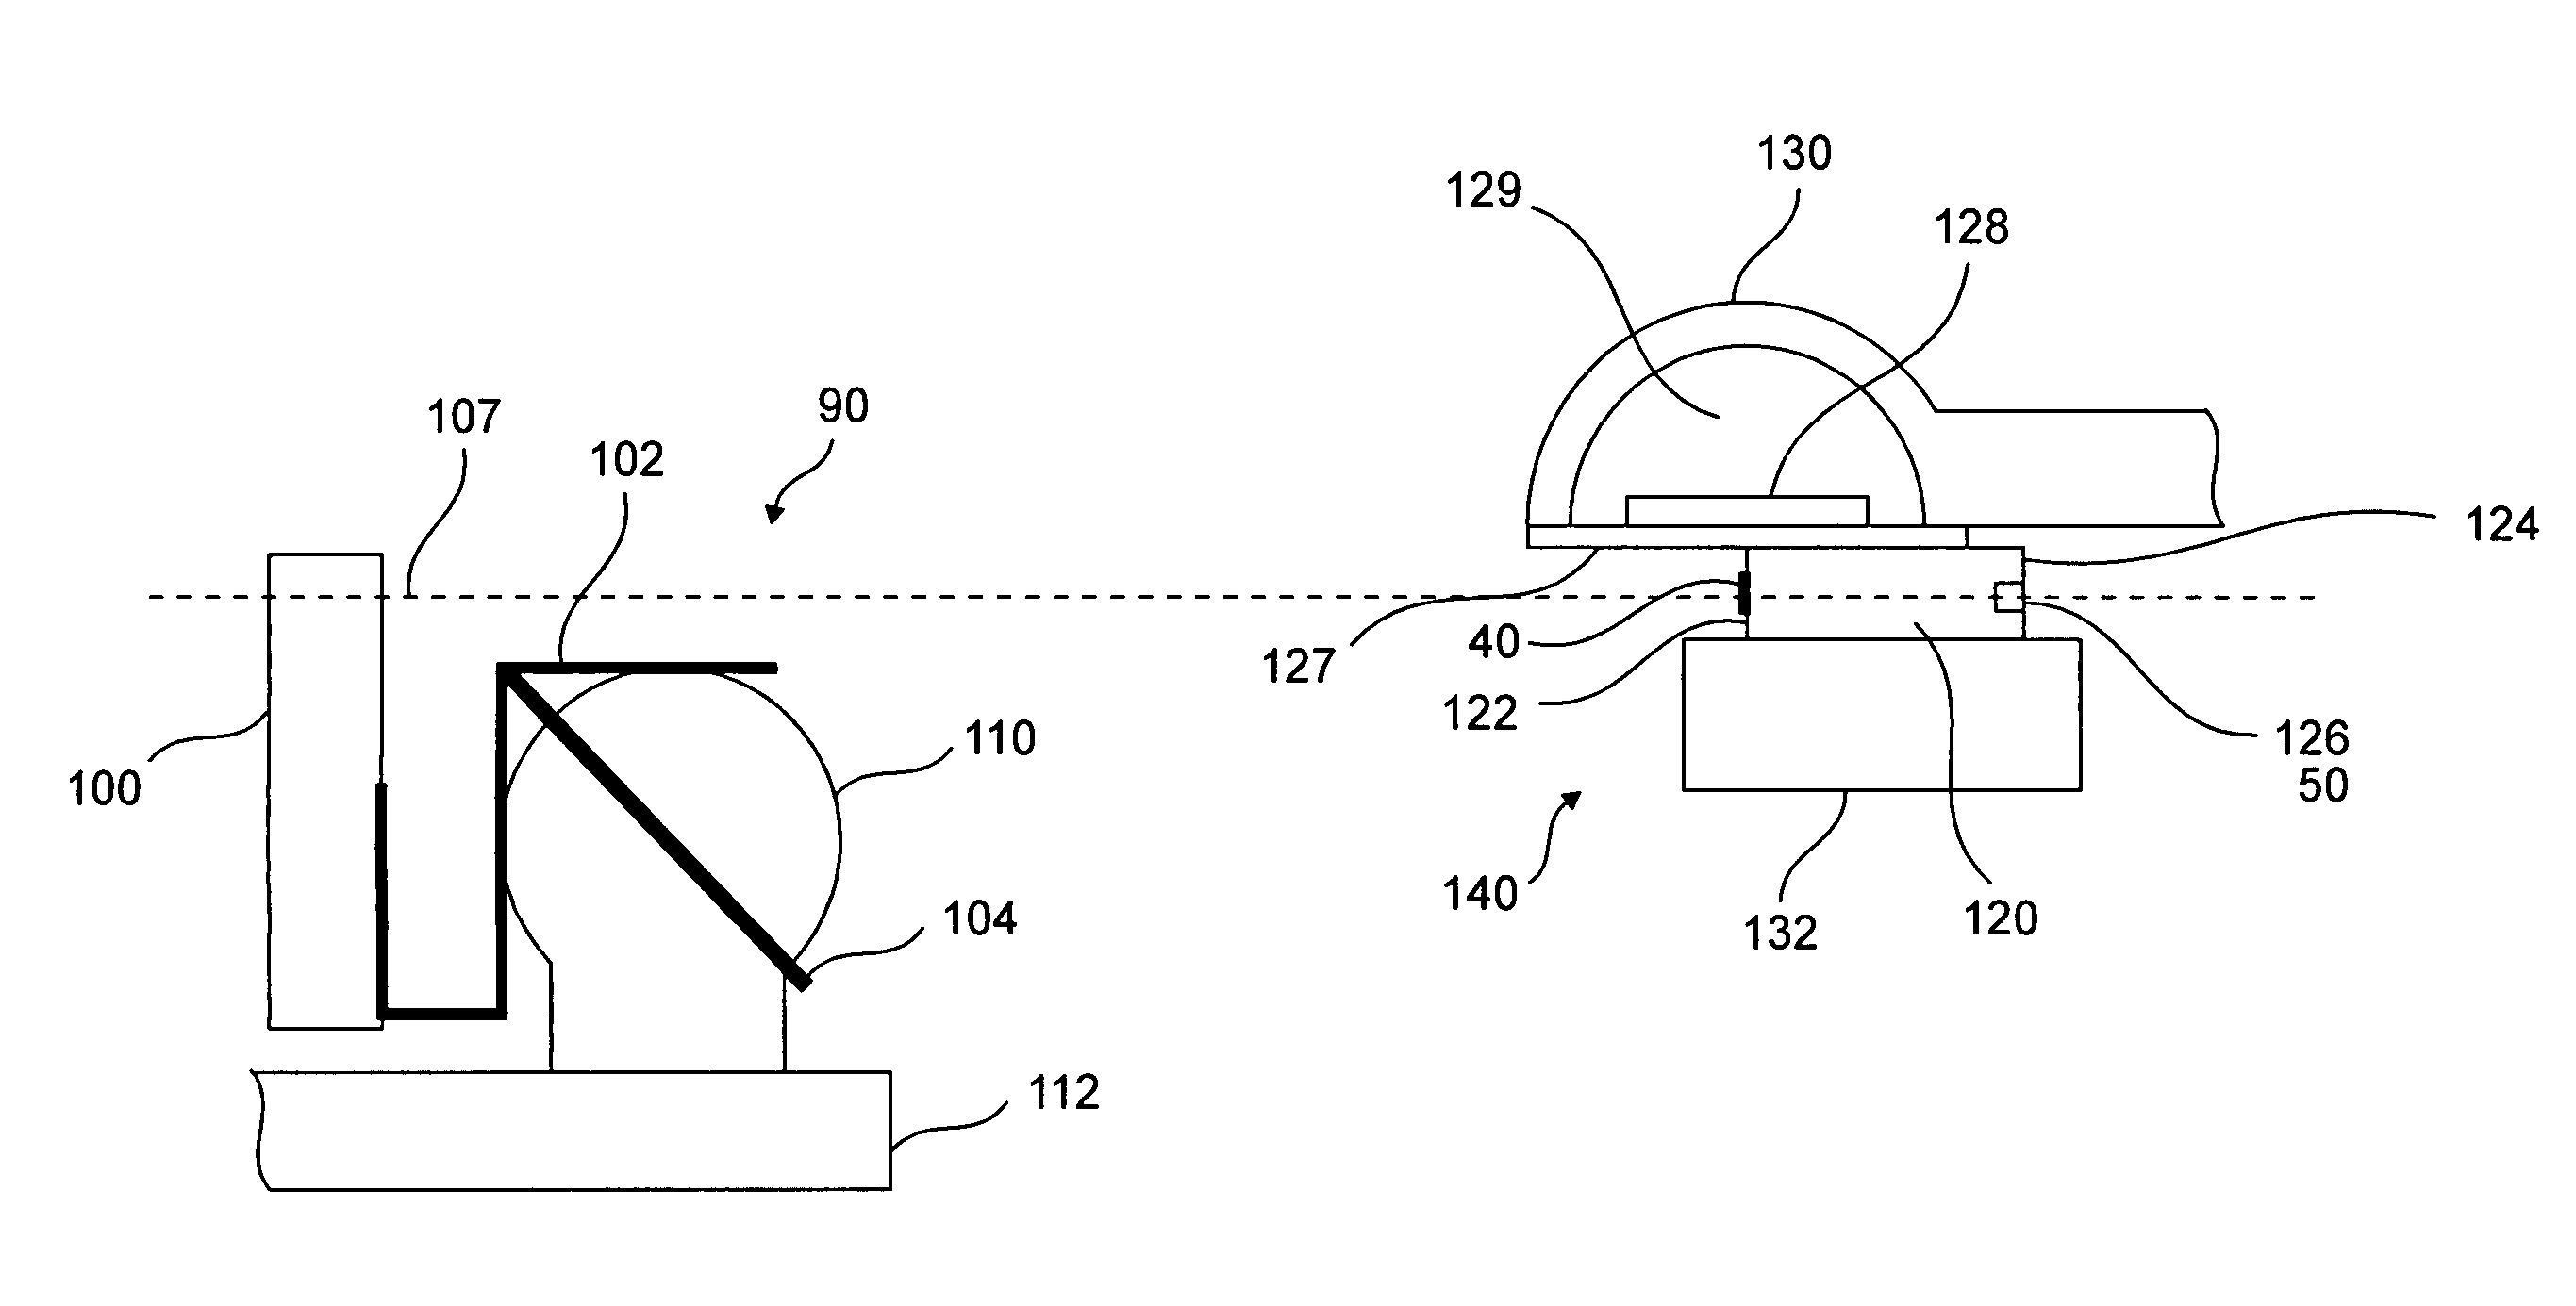 Trailer hitching and backing precision guidance system method and apparatus